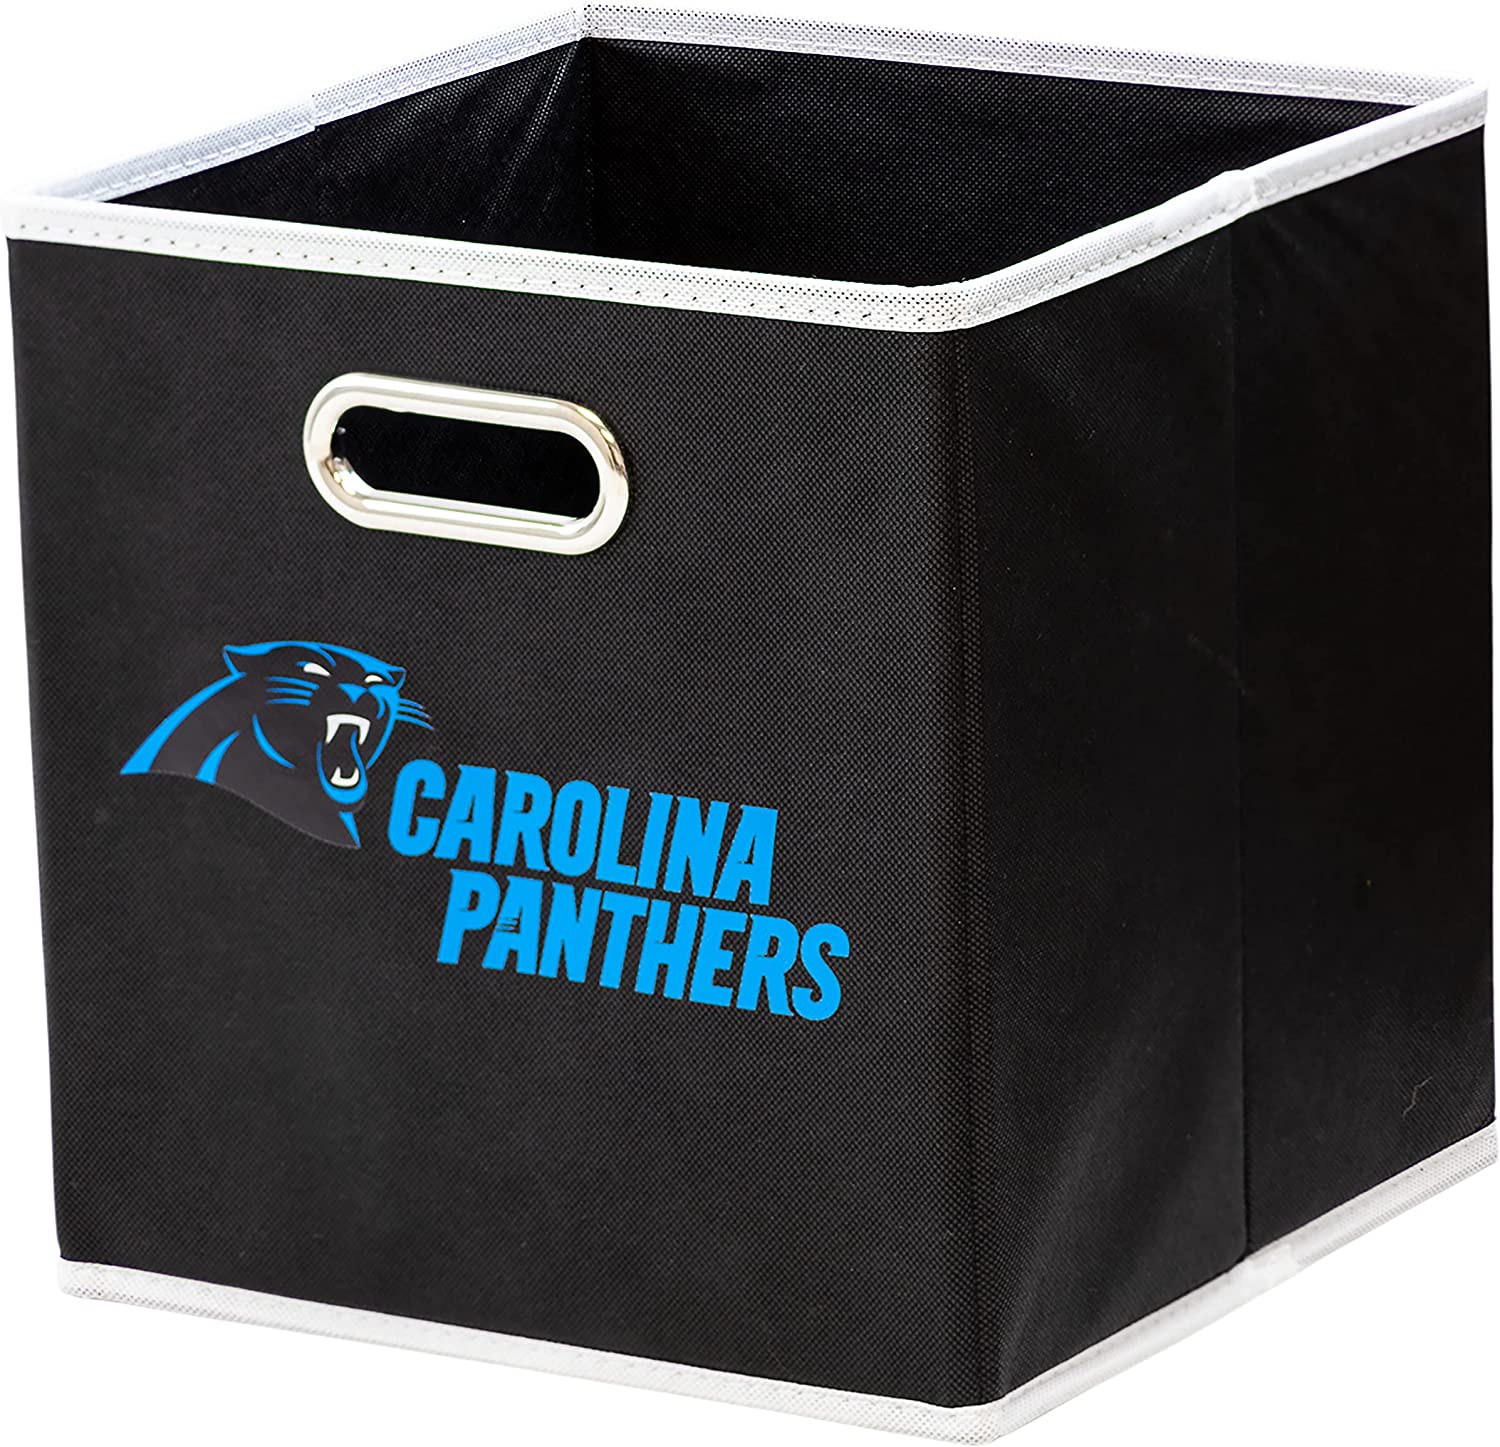 Franklin Sports NFL Storage Bins - Collapsible Cube Container + Storage ...